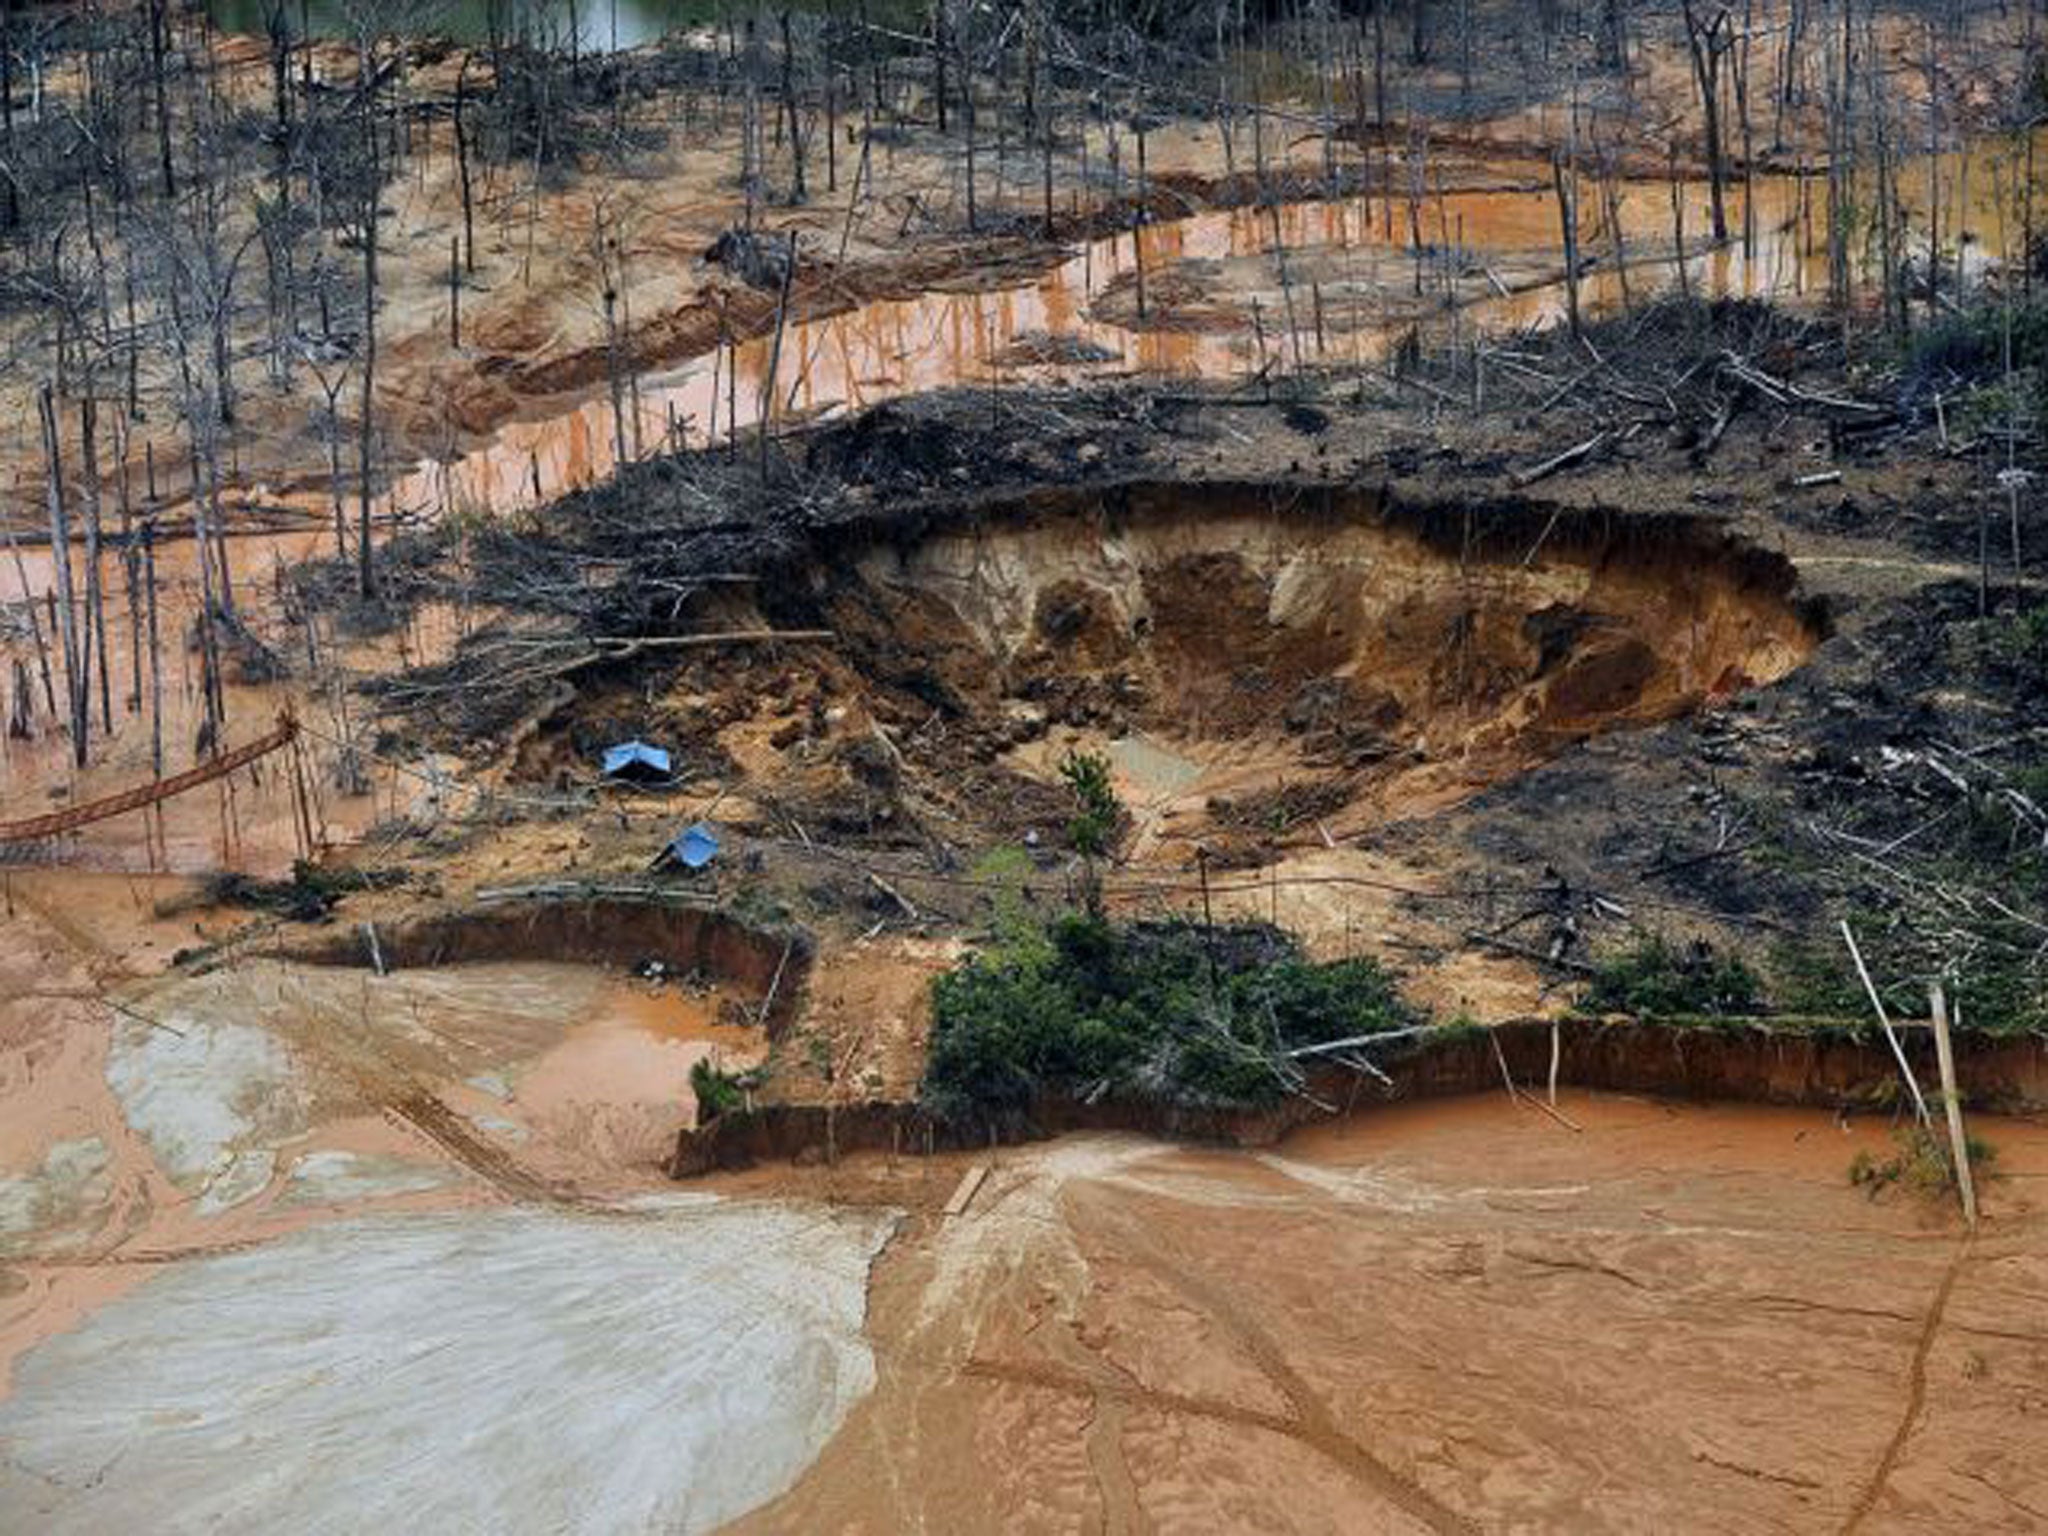 Illegal gold mining has led to acres of rainforest in Peru’s Madre de Dios region being destroyed